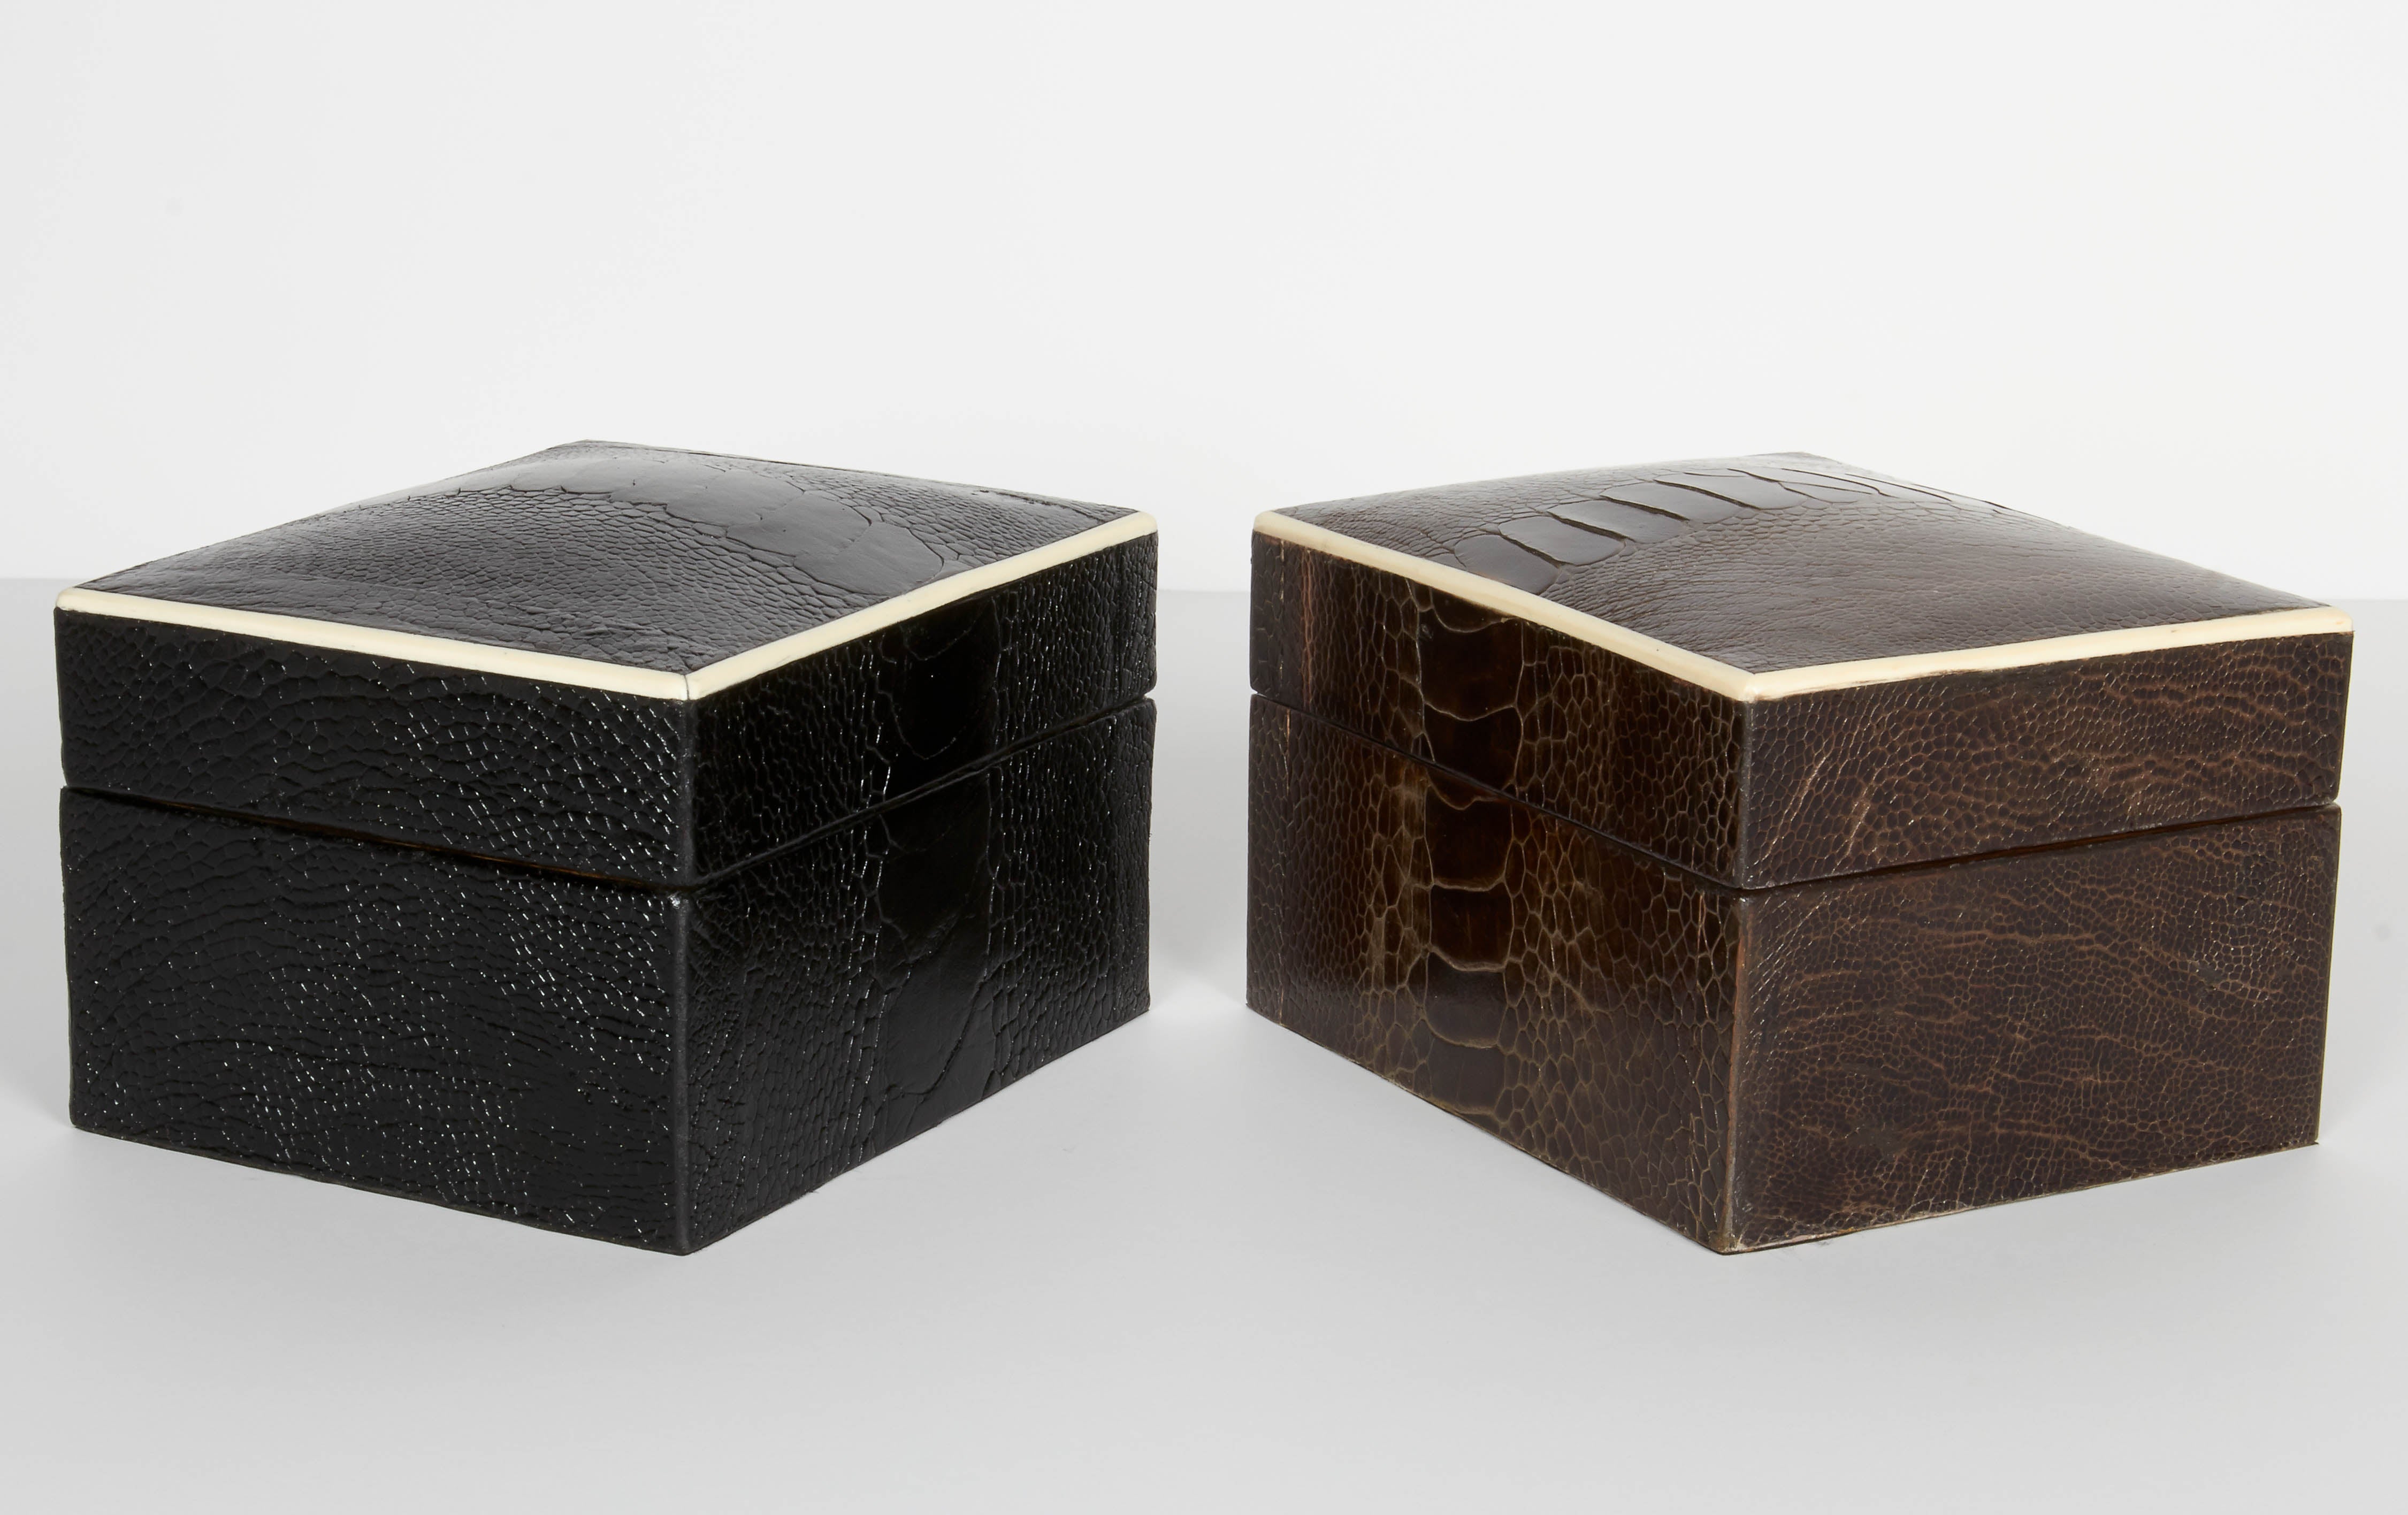 Stunning organic modern decorative boxes wrapped in exotic ostrich leather with bone inlay trim. All handcrafted in fine leather available in espresso brown or black ebony, with palm wood interiors. Mid-century modern style make great desk and